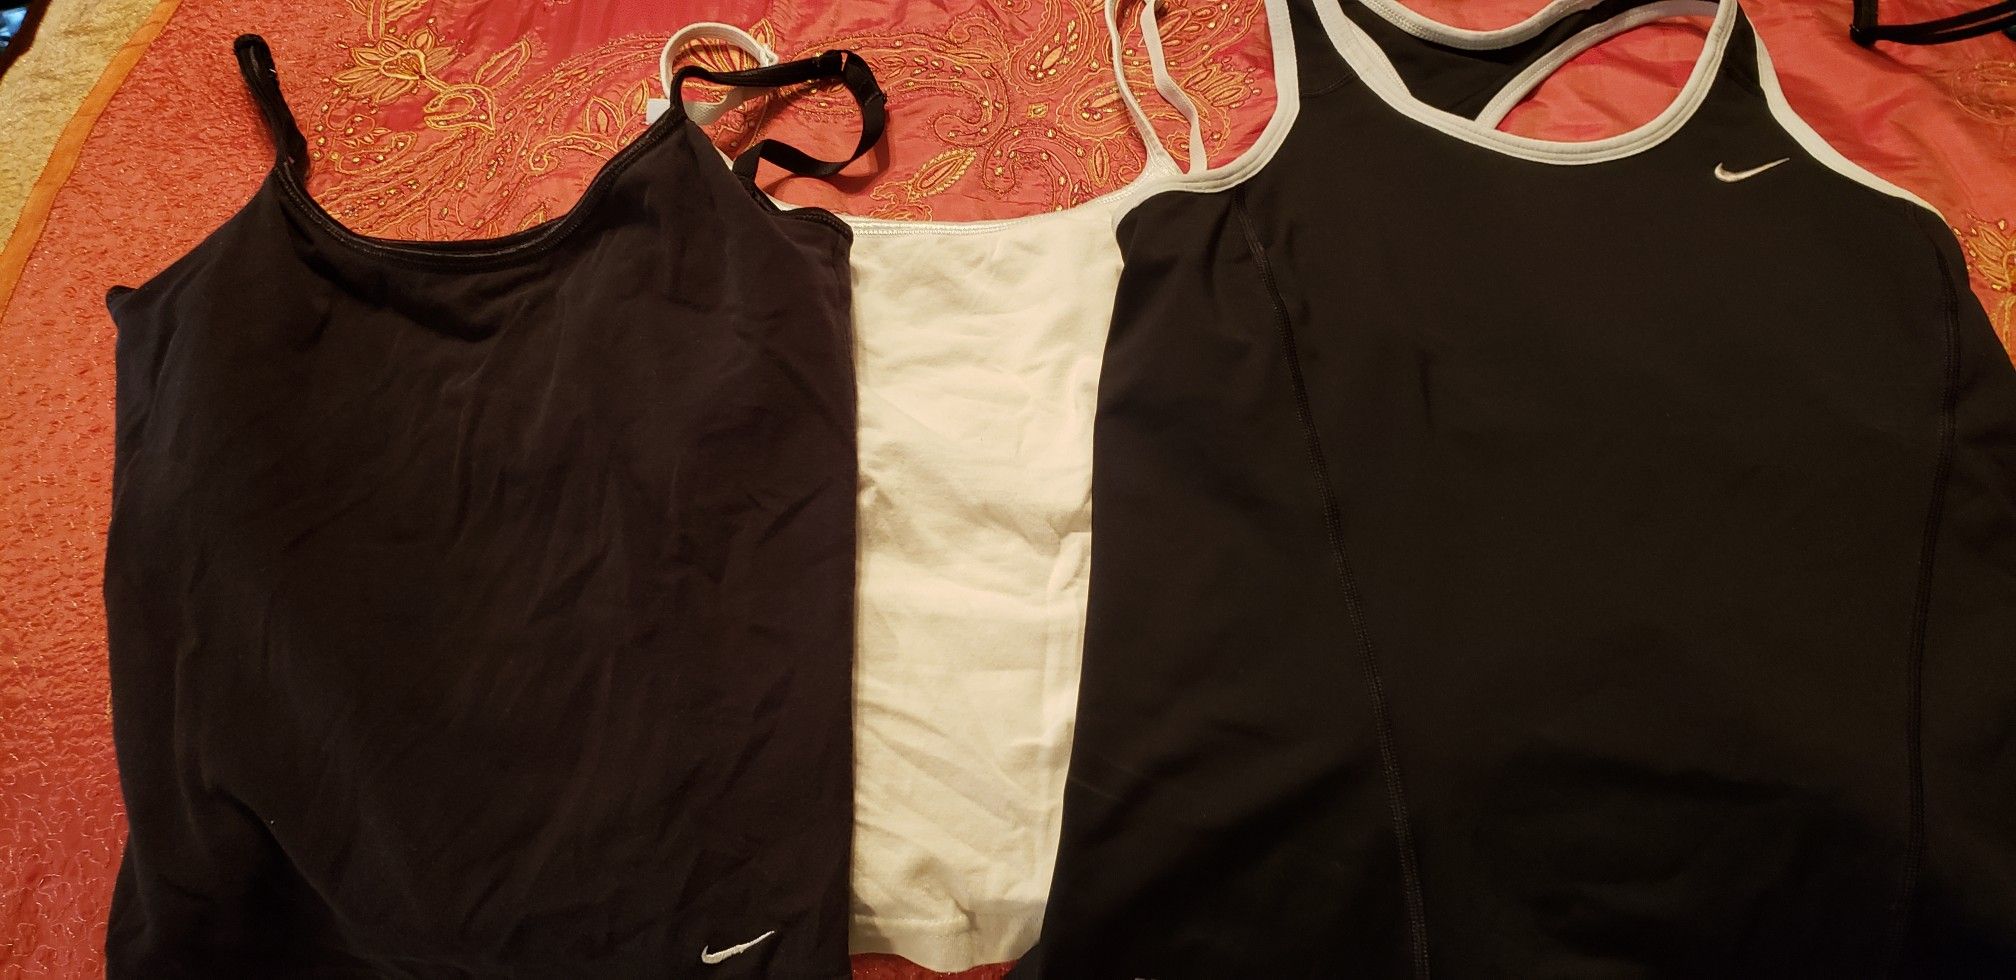 3 Nike size small work out shirts